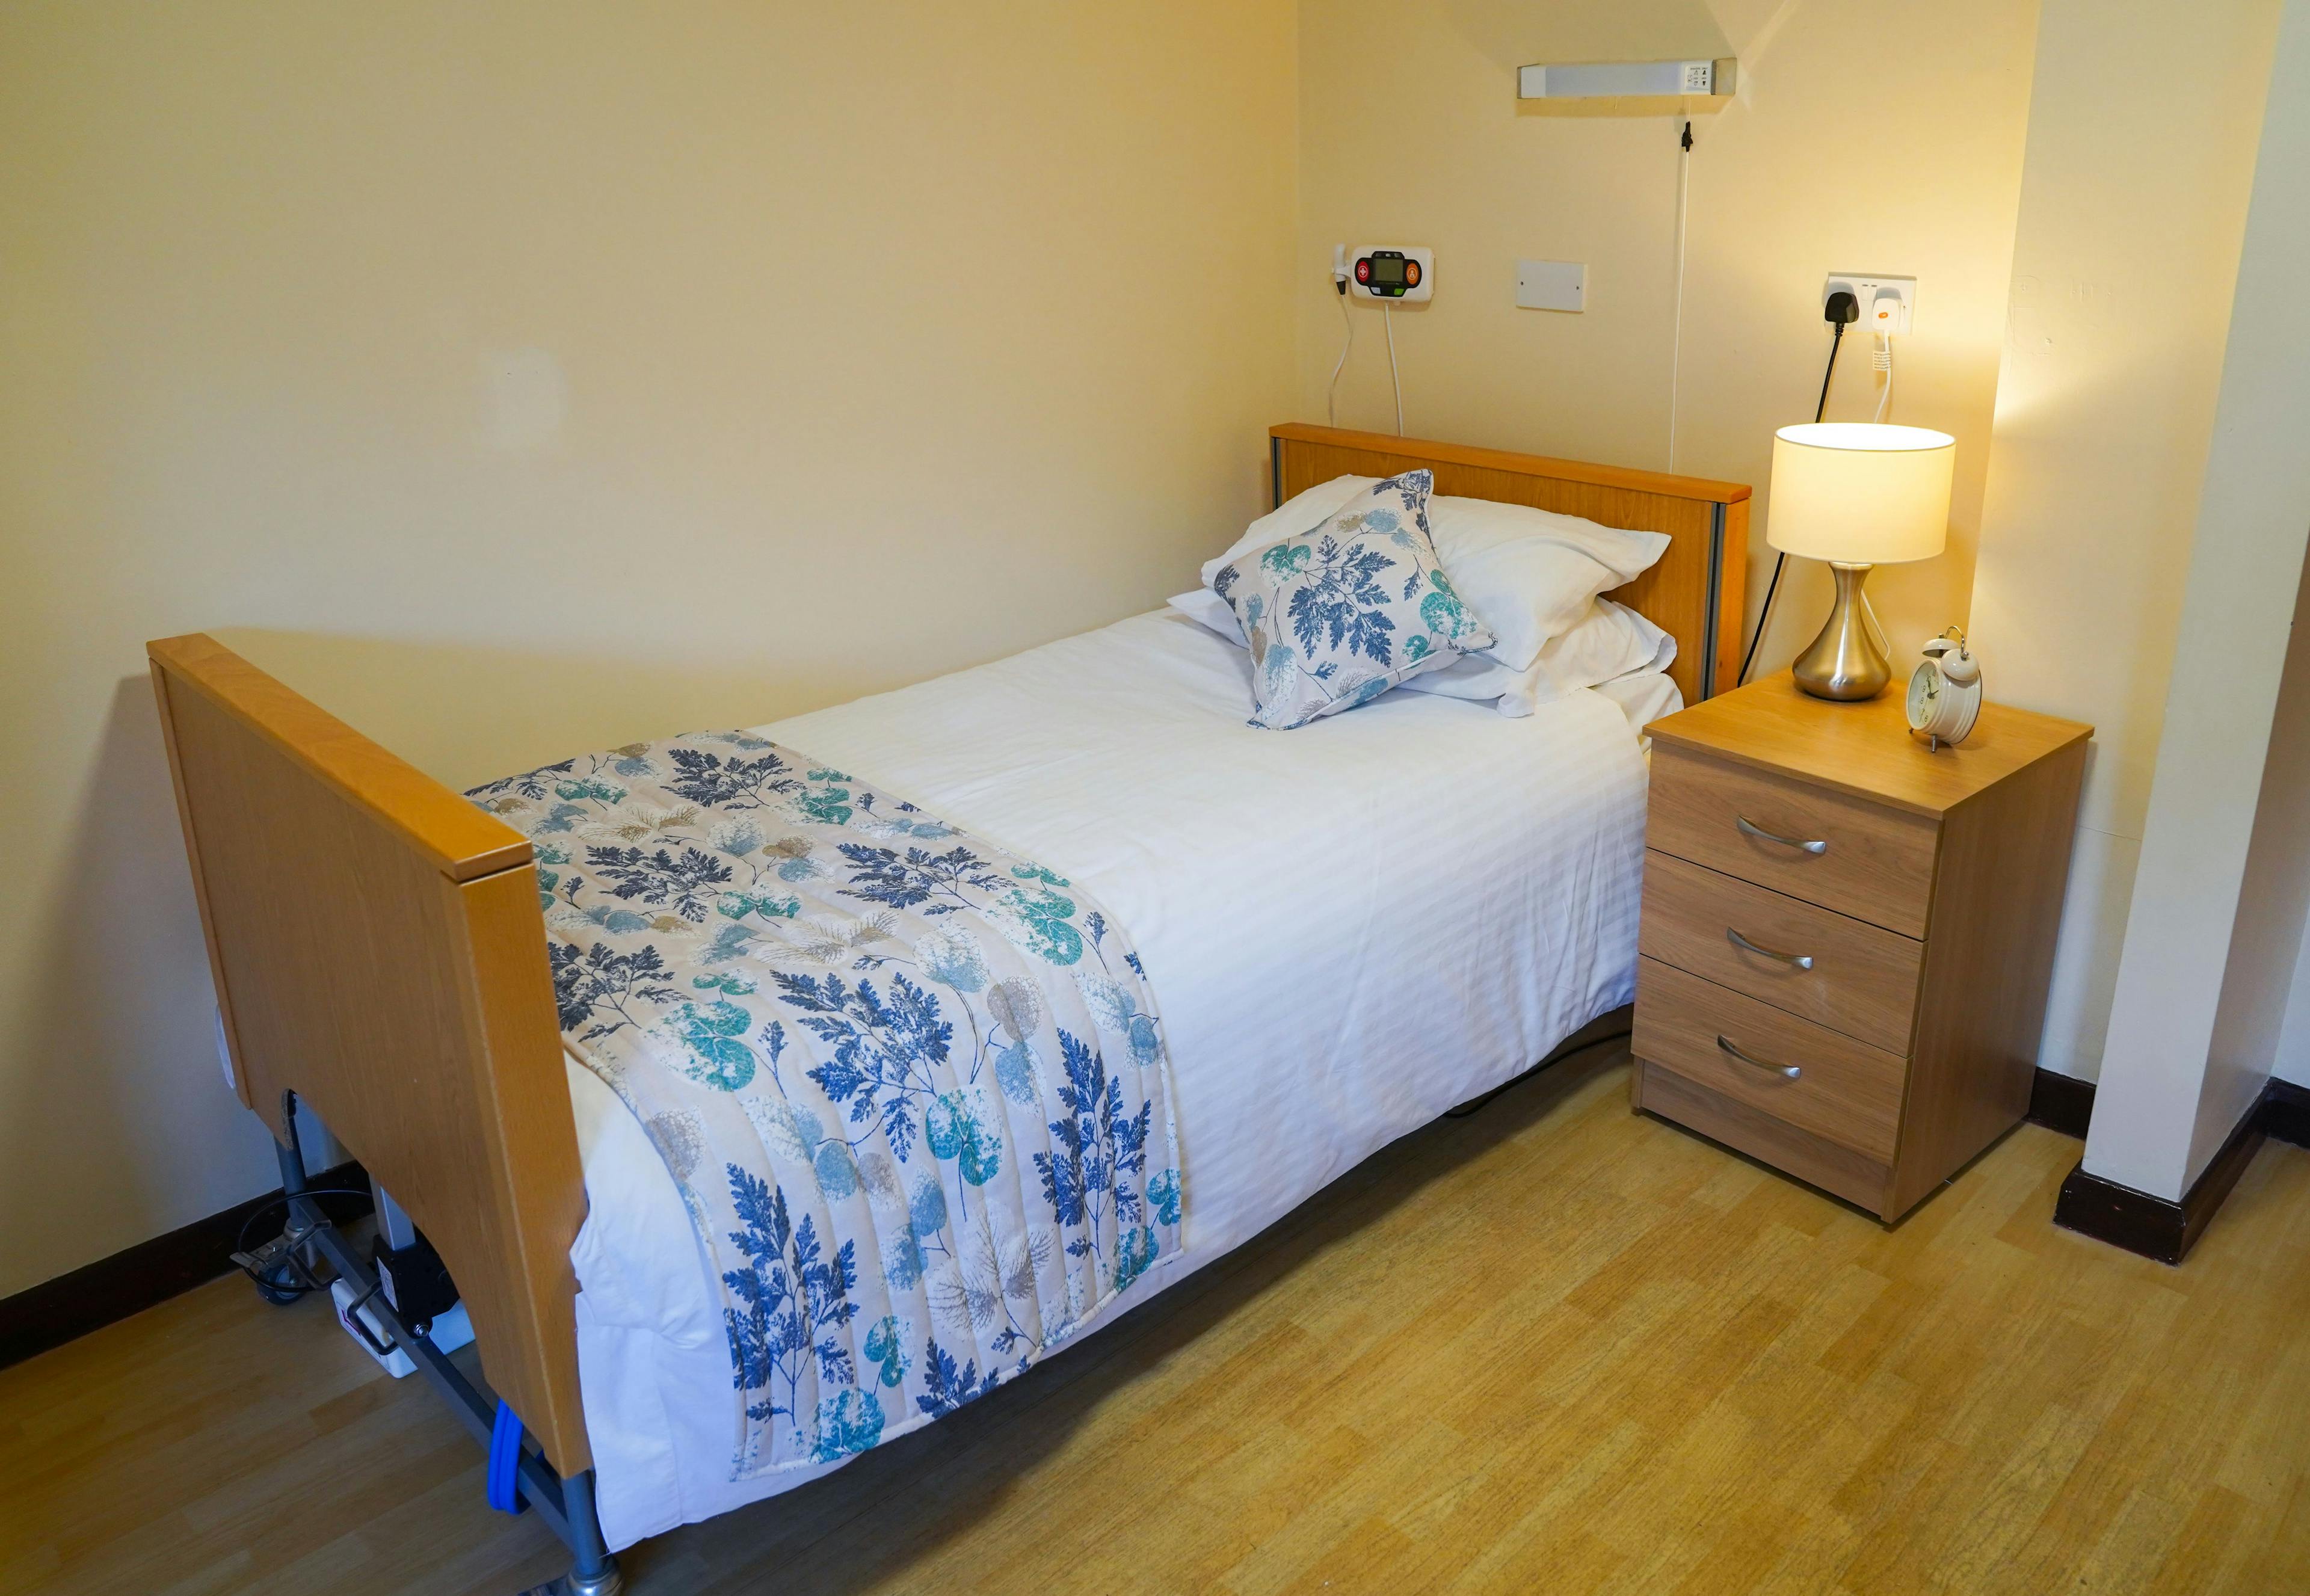 Bedroom at Calton House Care Home in Bletchley, Milton Keynes